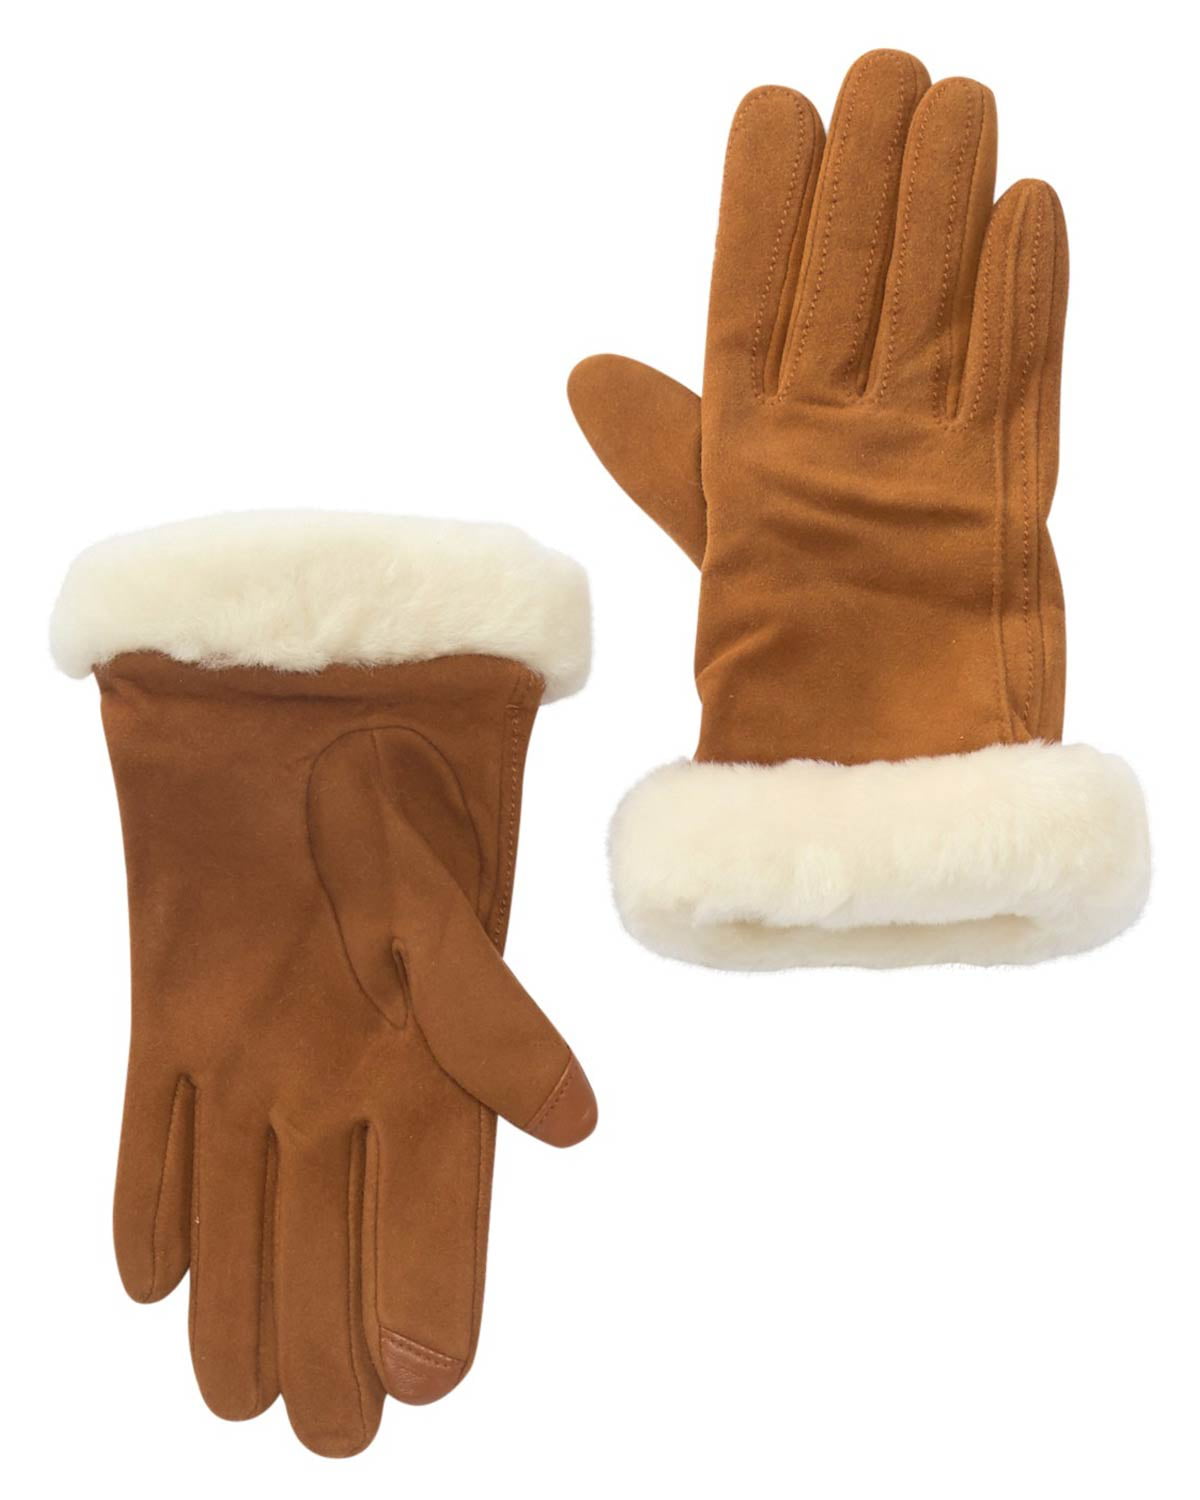 ugg gloves clearance